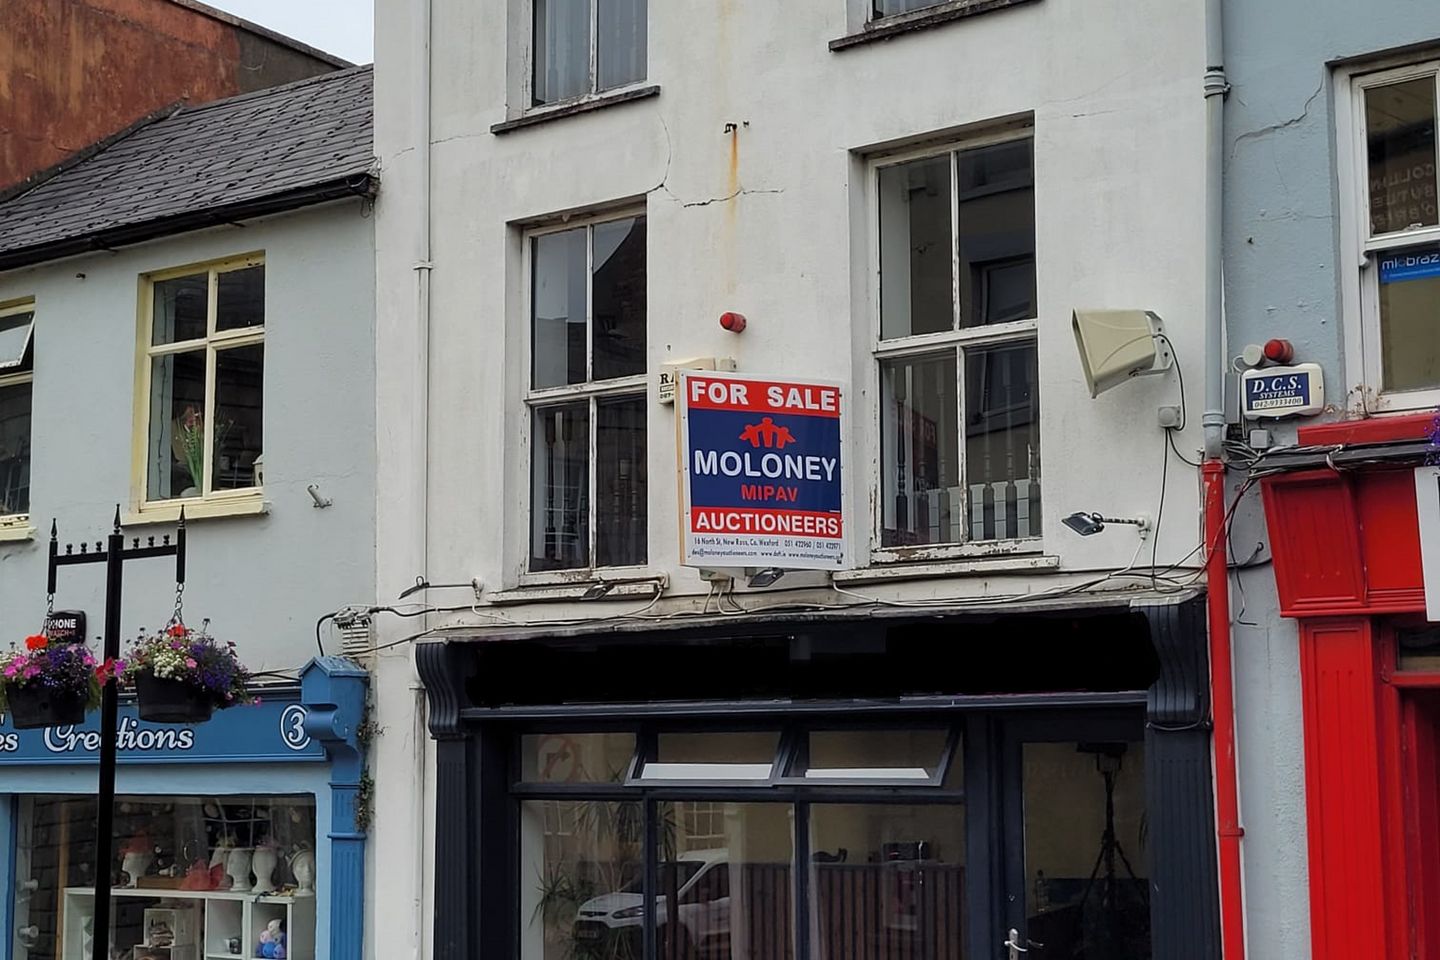 4 Mary Street, New Ross, Co. Wexford, Y34NX73